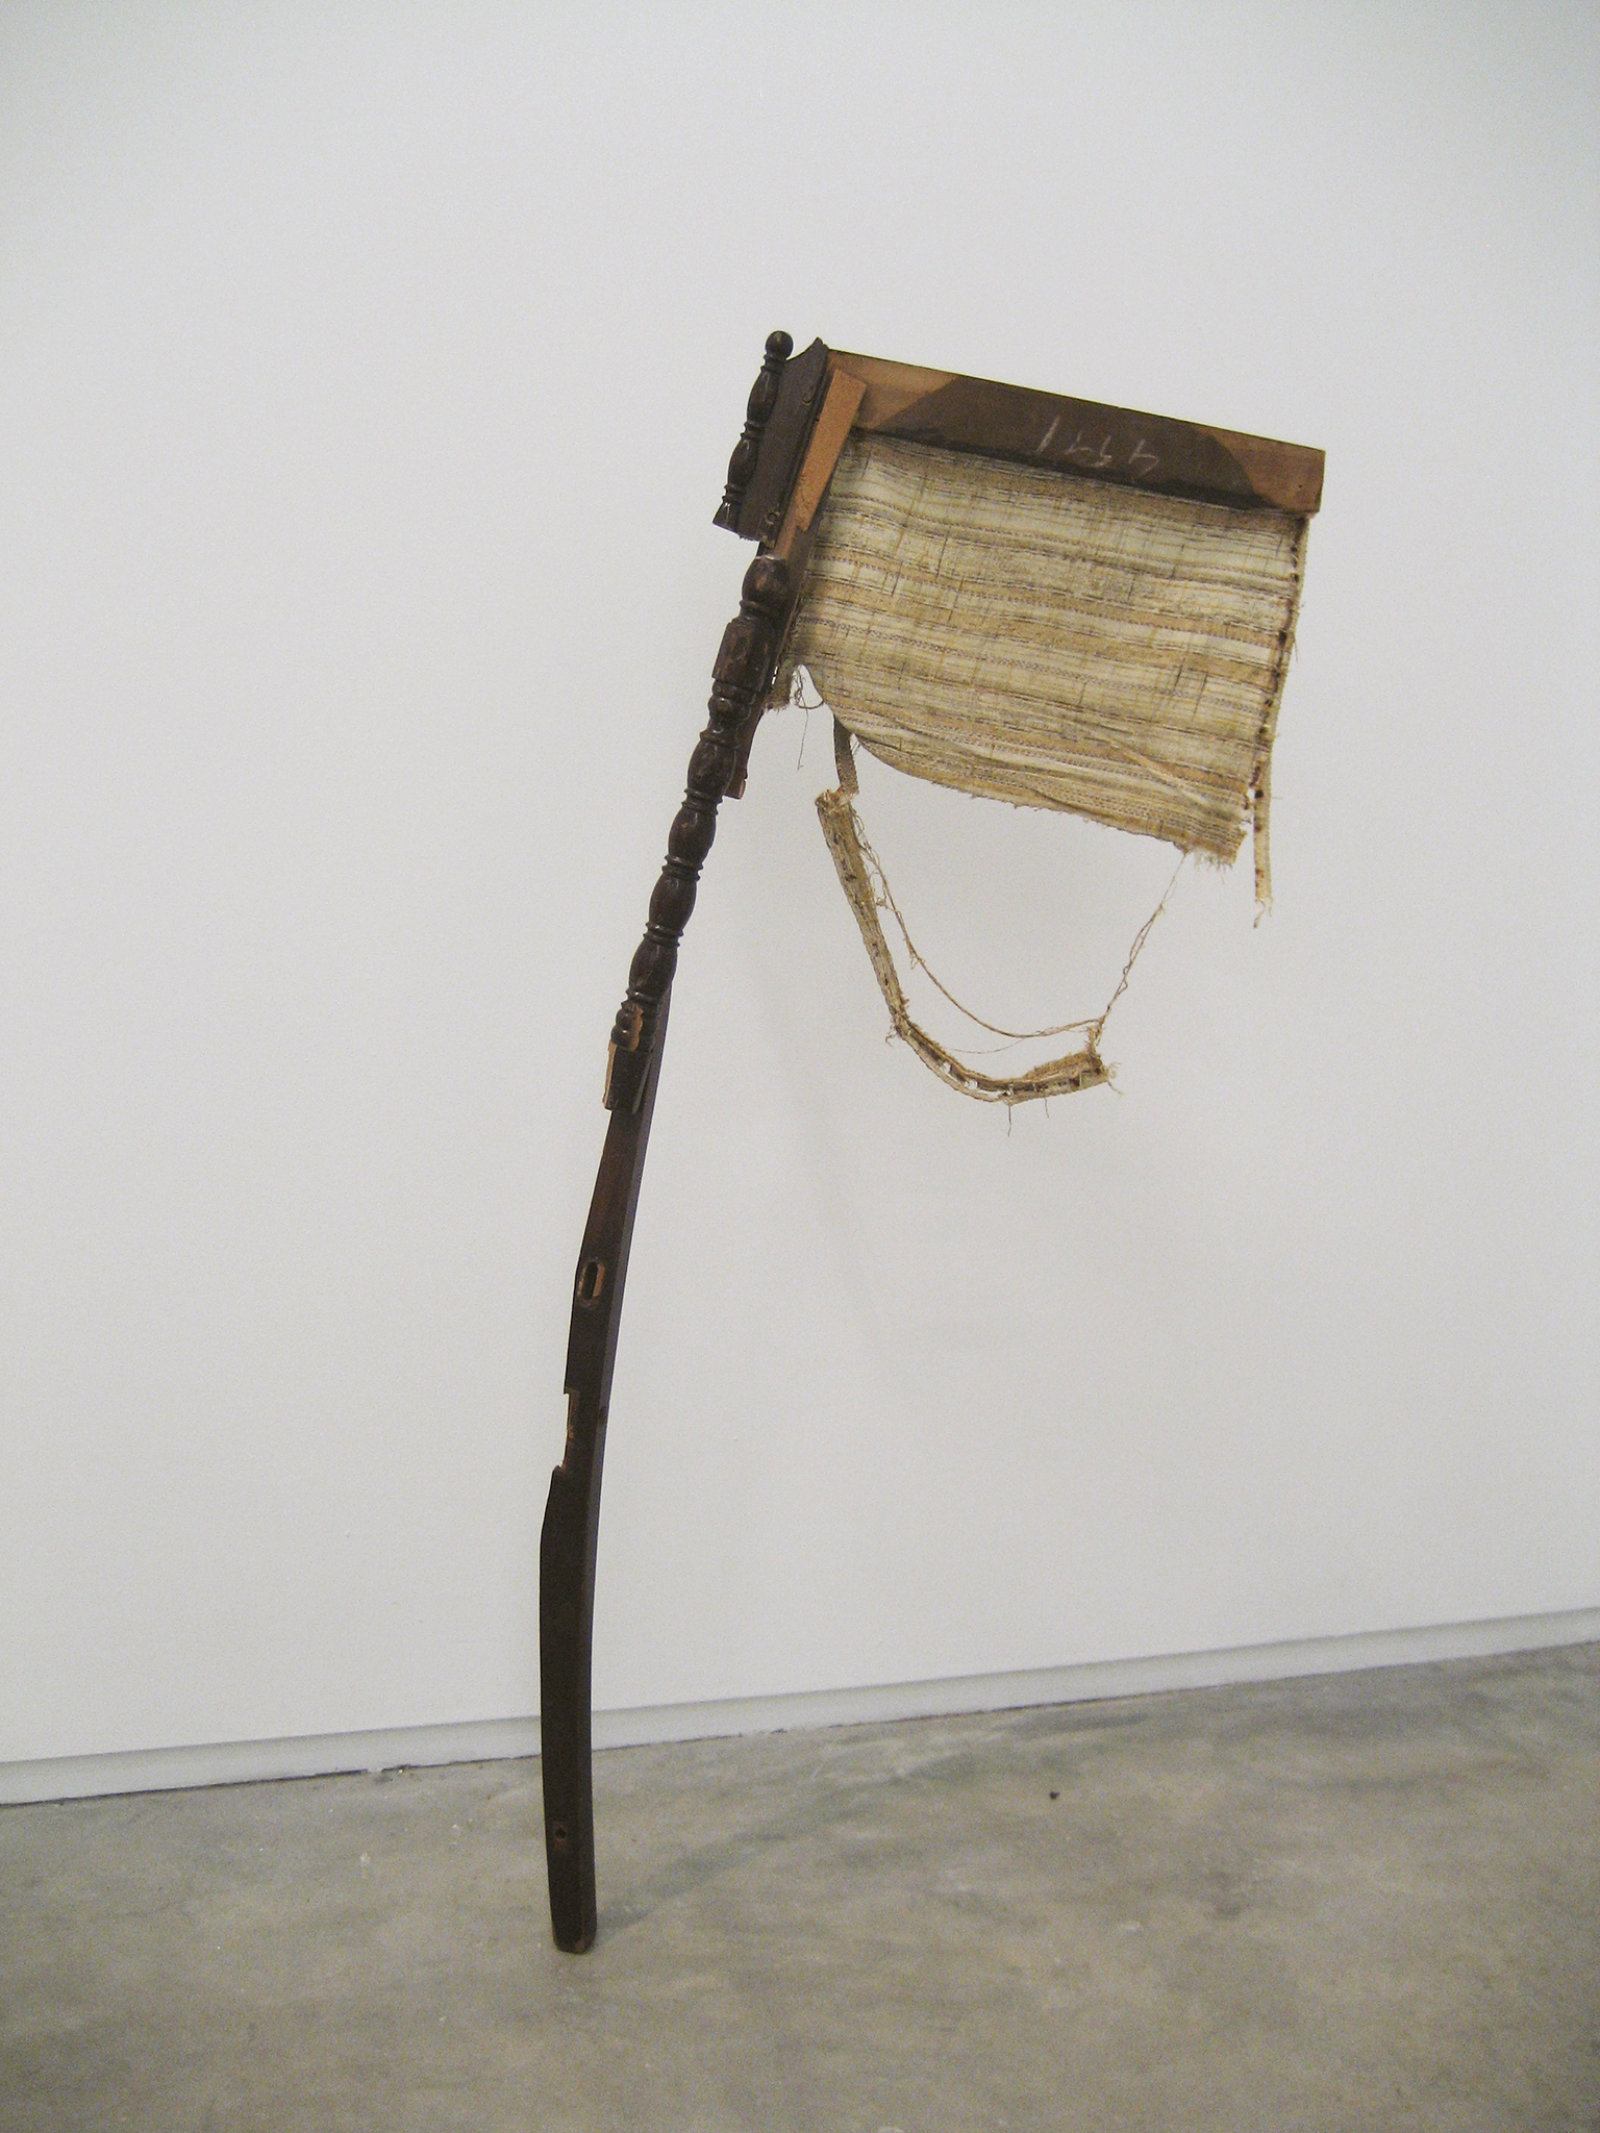 Ashes Withyman, Chair Flag, 2009, found chair, 51 x 17 x 3 in. (130 x 44 x 6 cm)